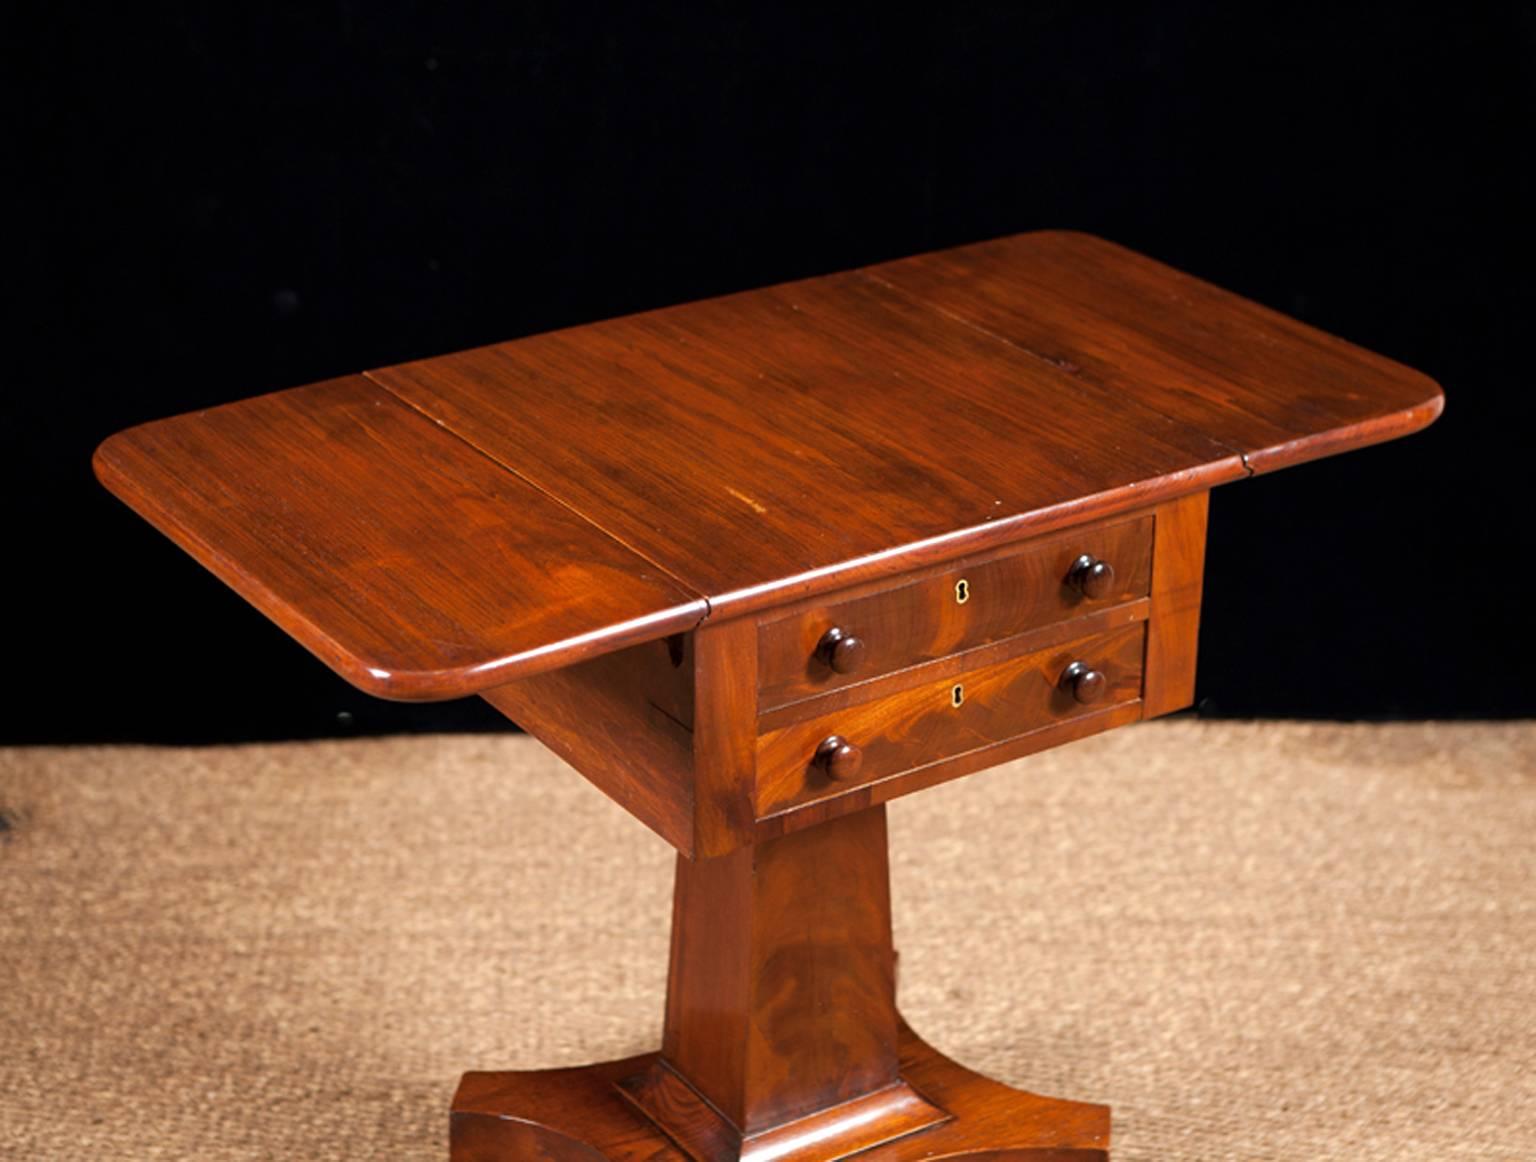 American Empire mahogany two-drawer work table with fold down Pembroke leaves, c. 1840.
Measures: 18